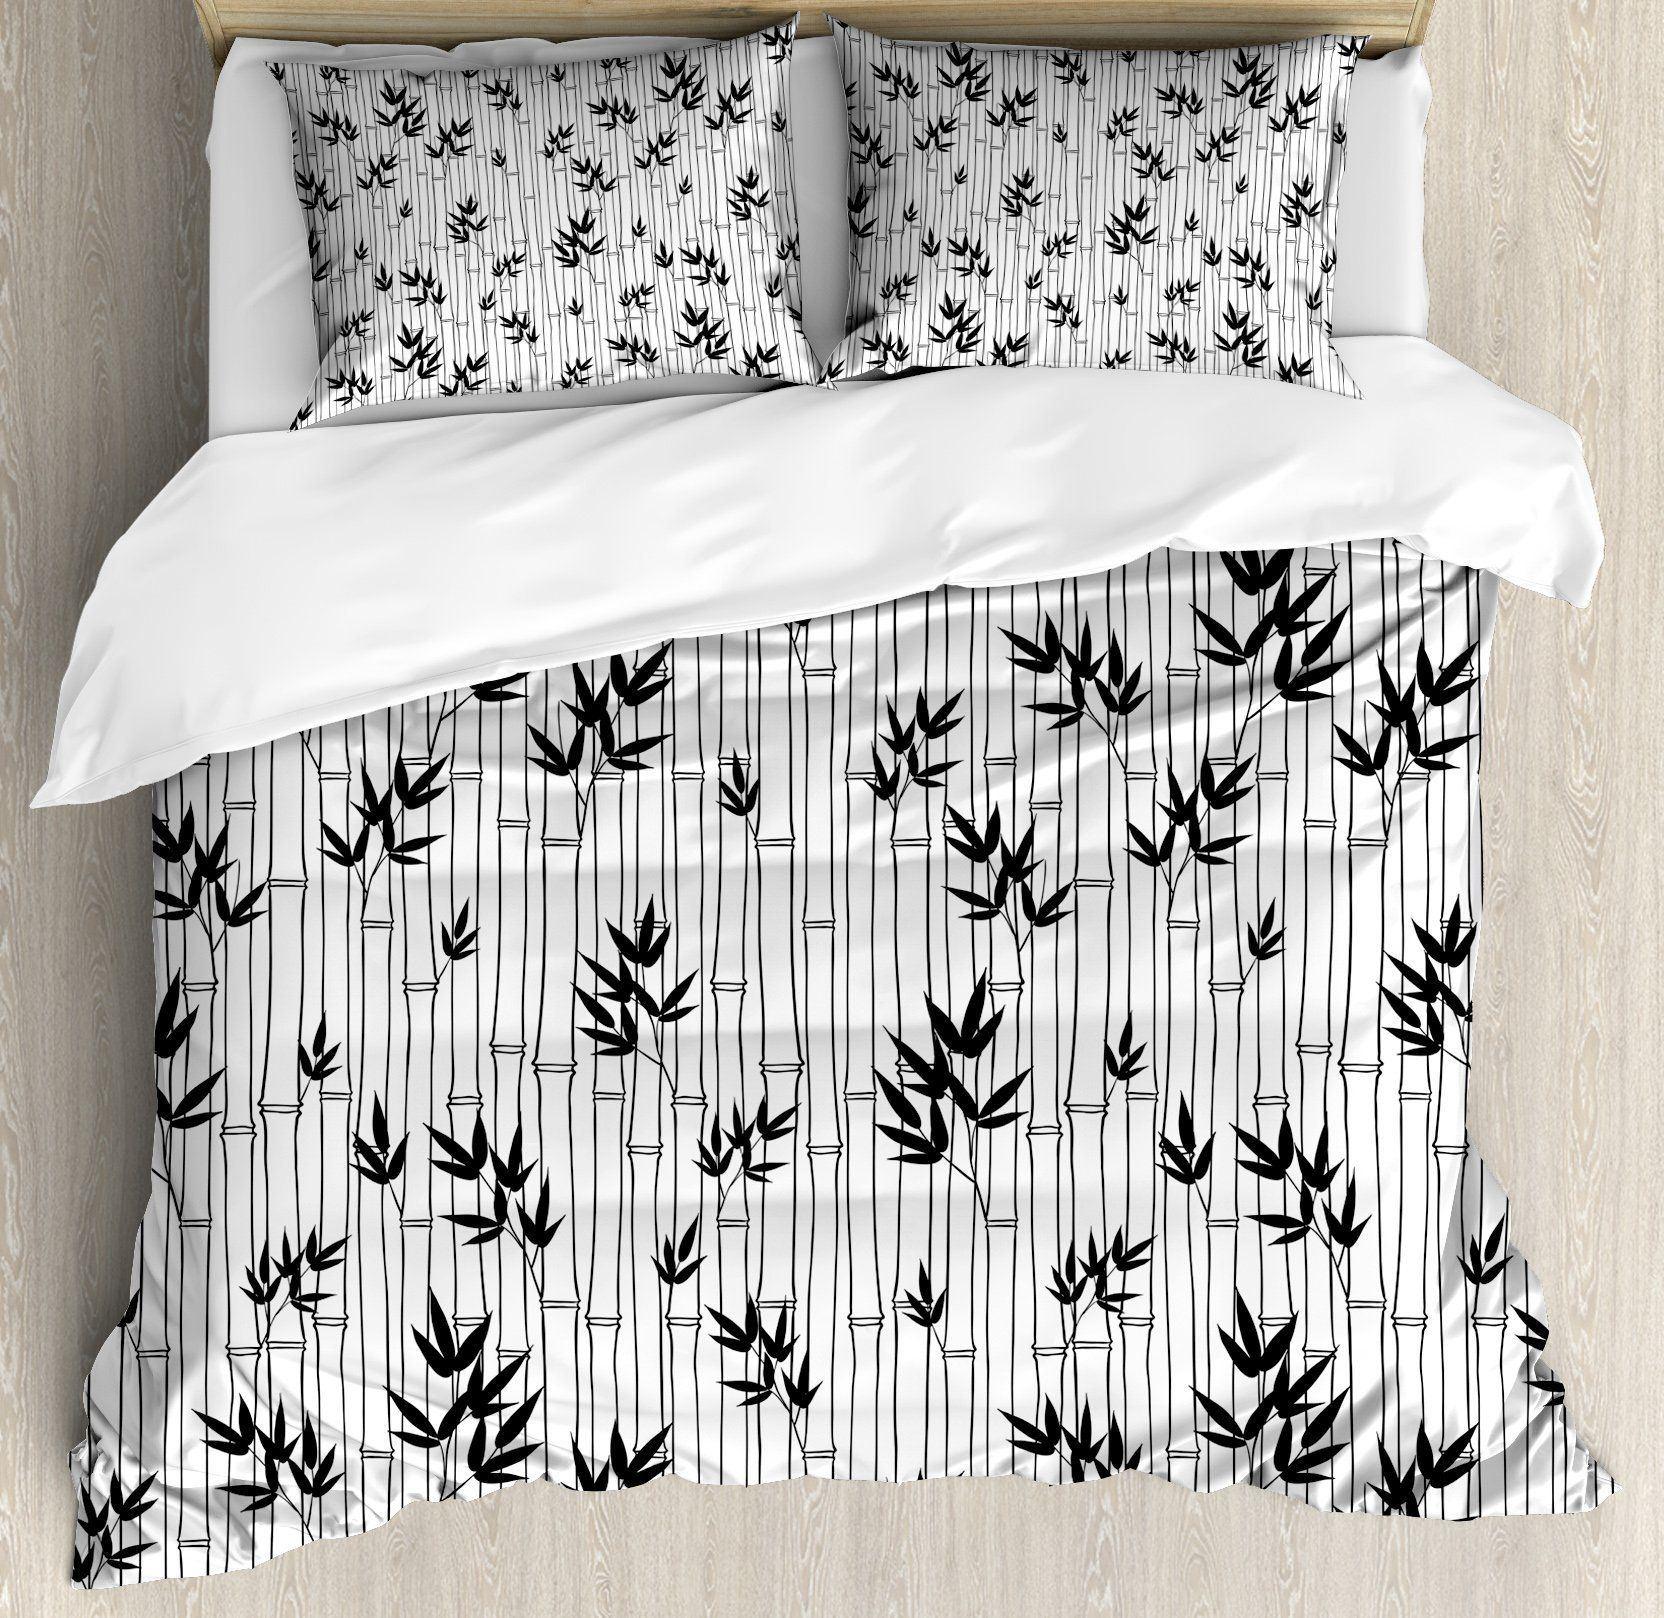 Cold F. reccomend Asian pattern bedding